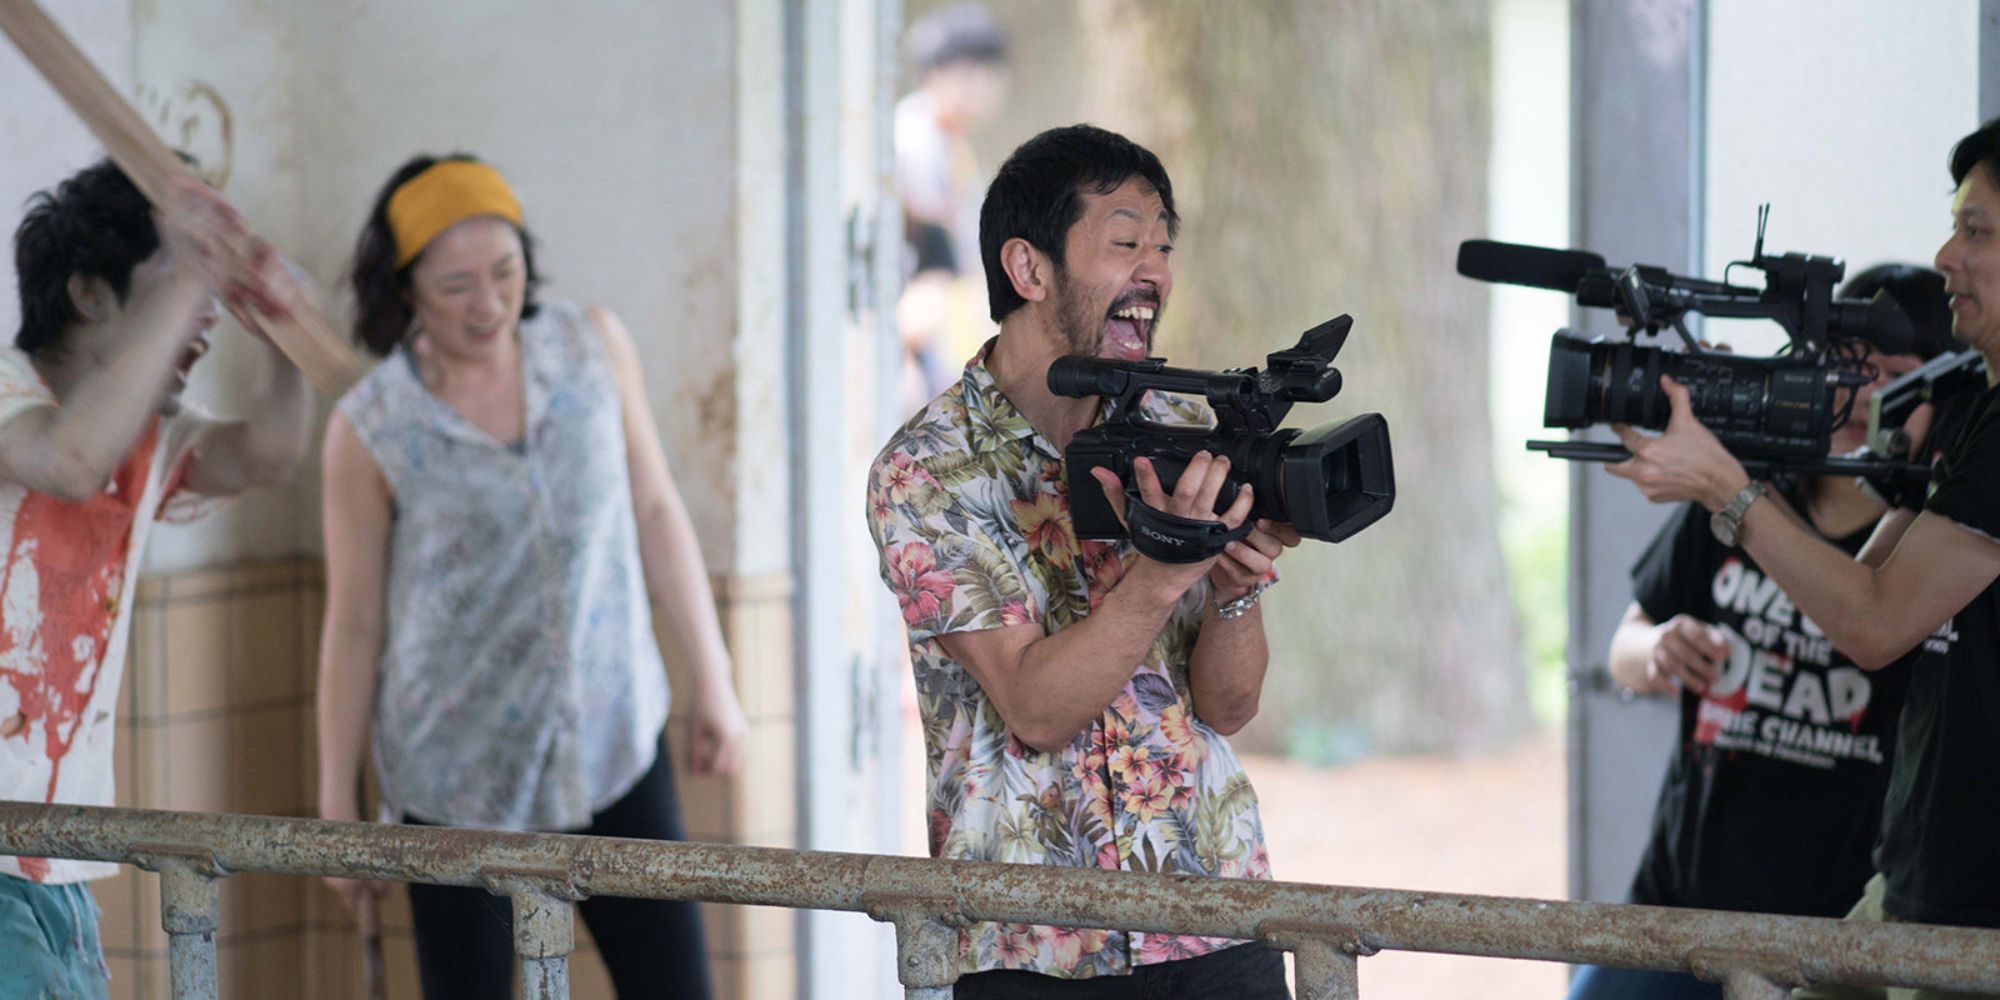 A still of the film crew in One Cut of the Dead